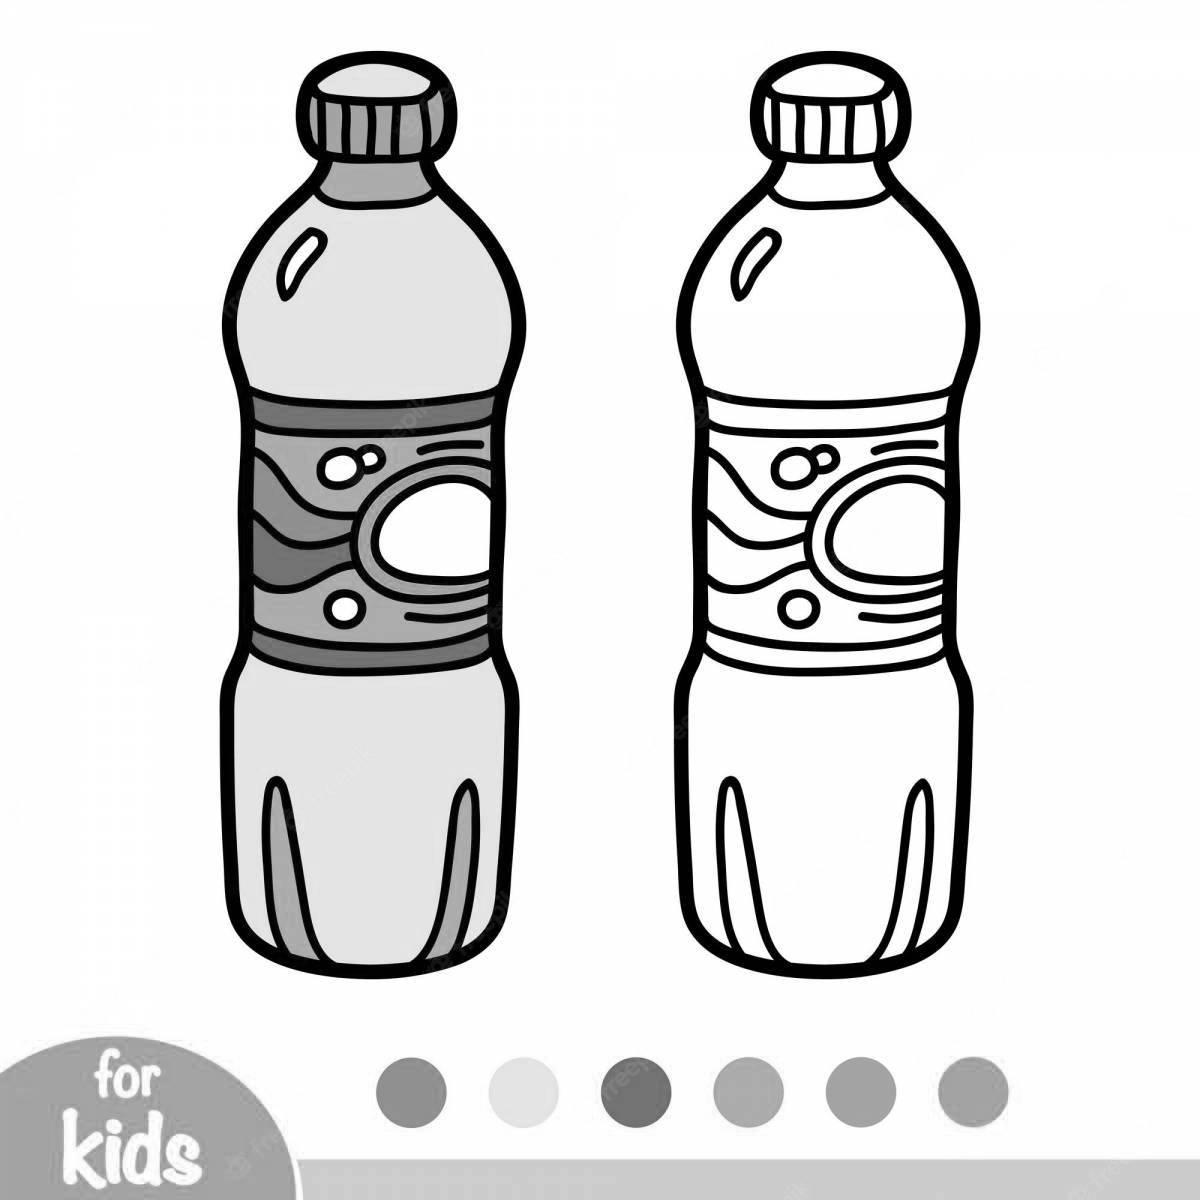 Colorful bottle coloring page for kids